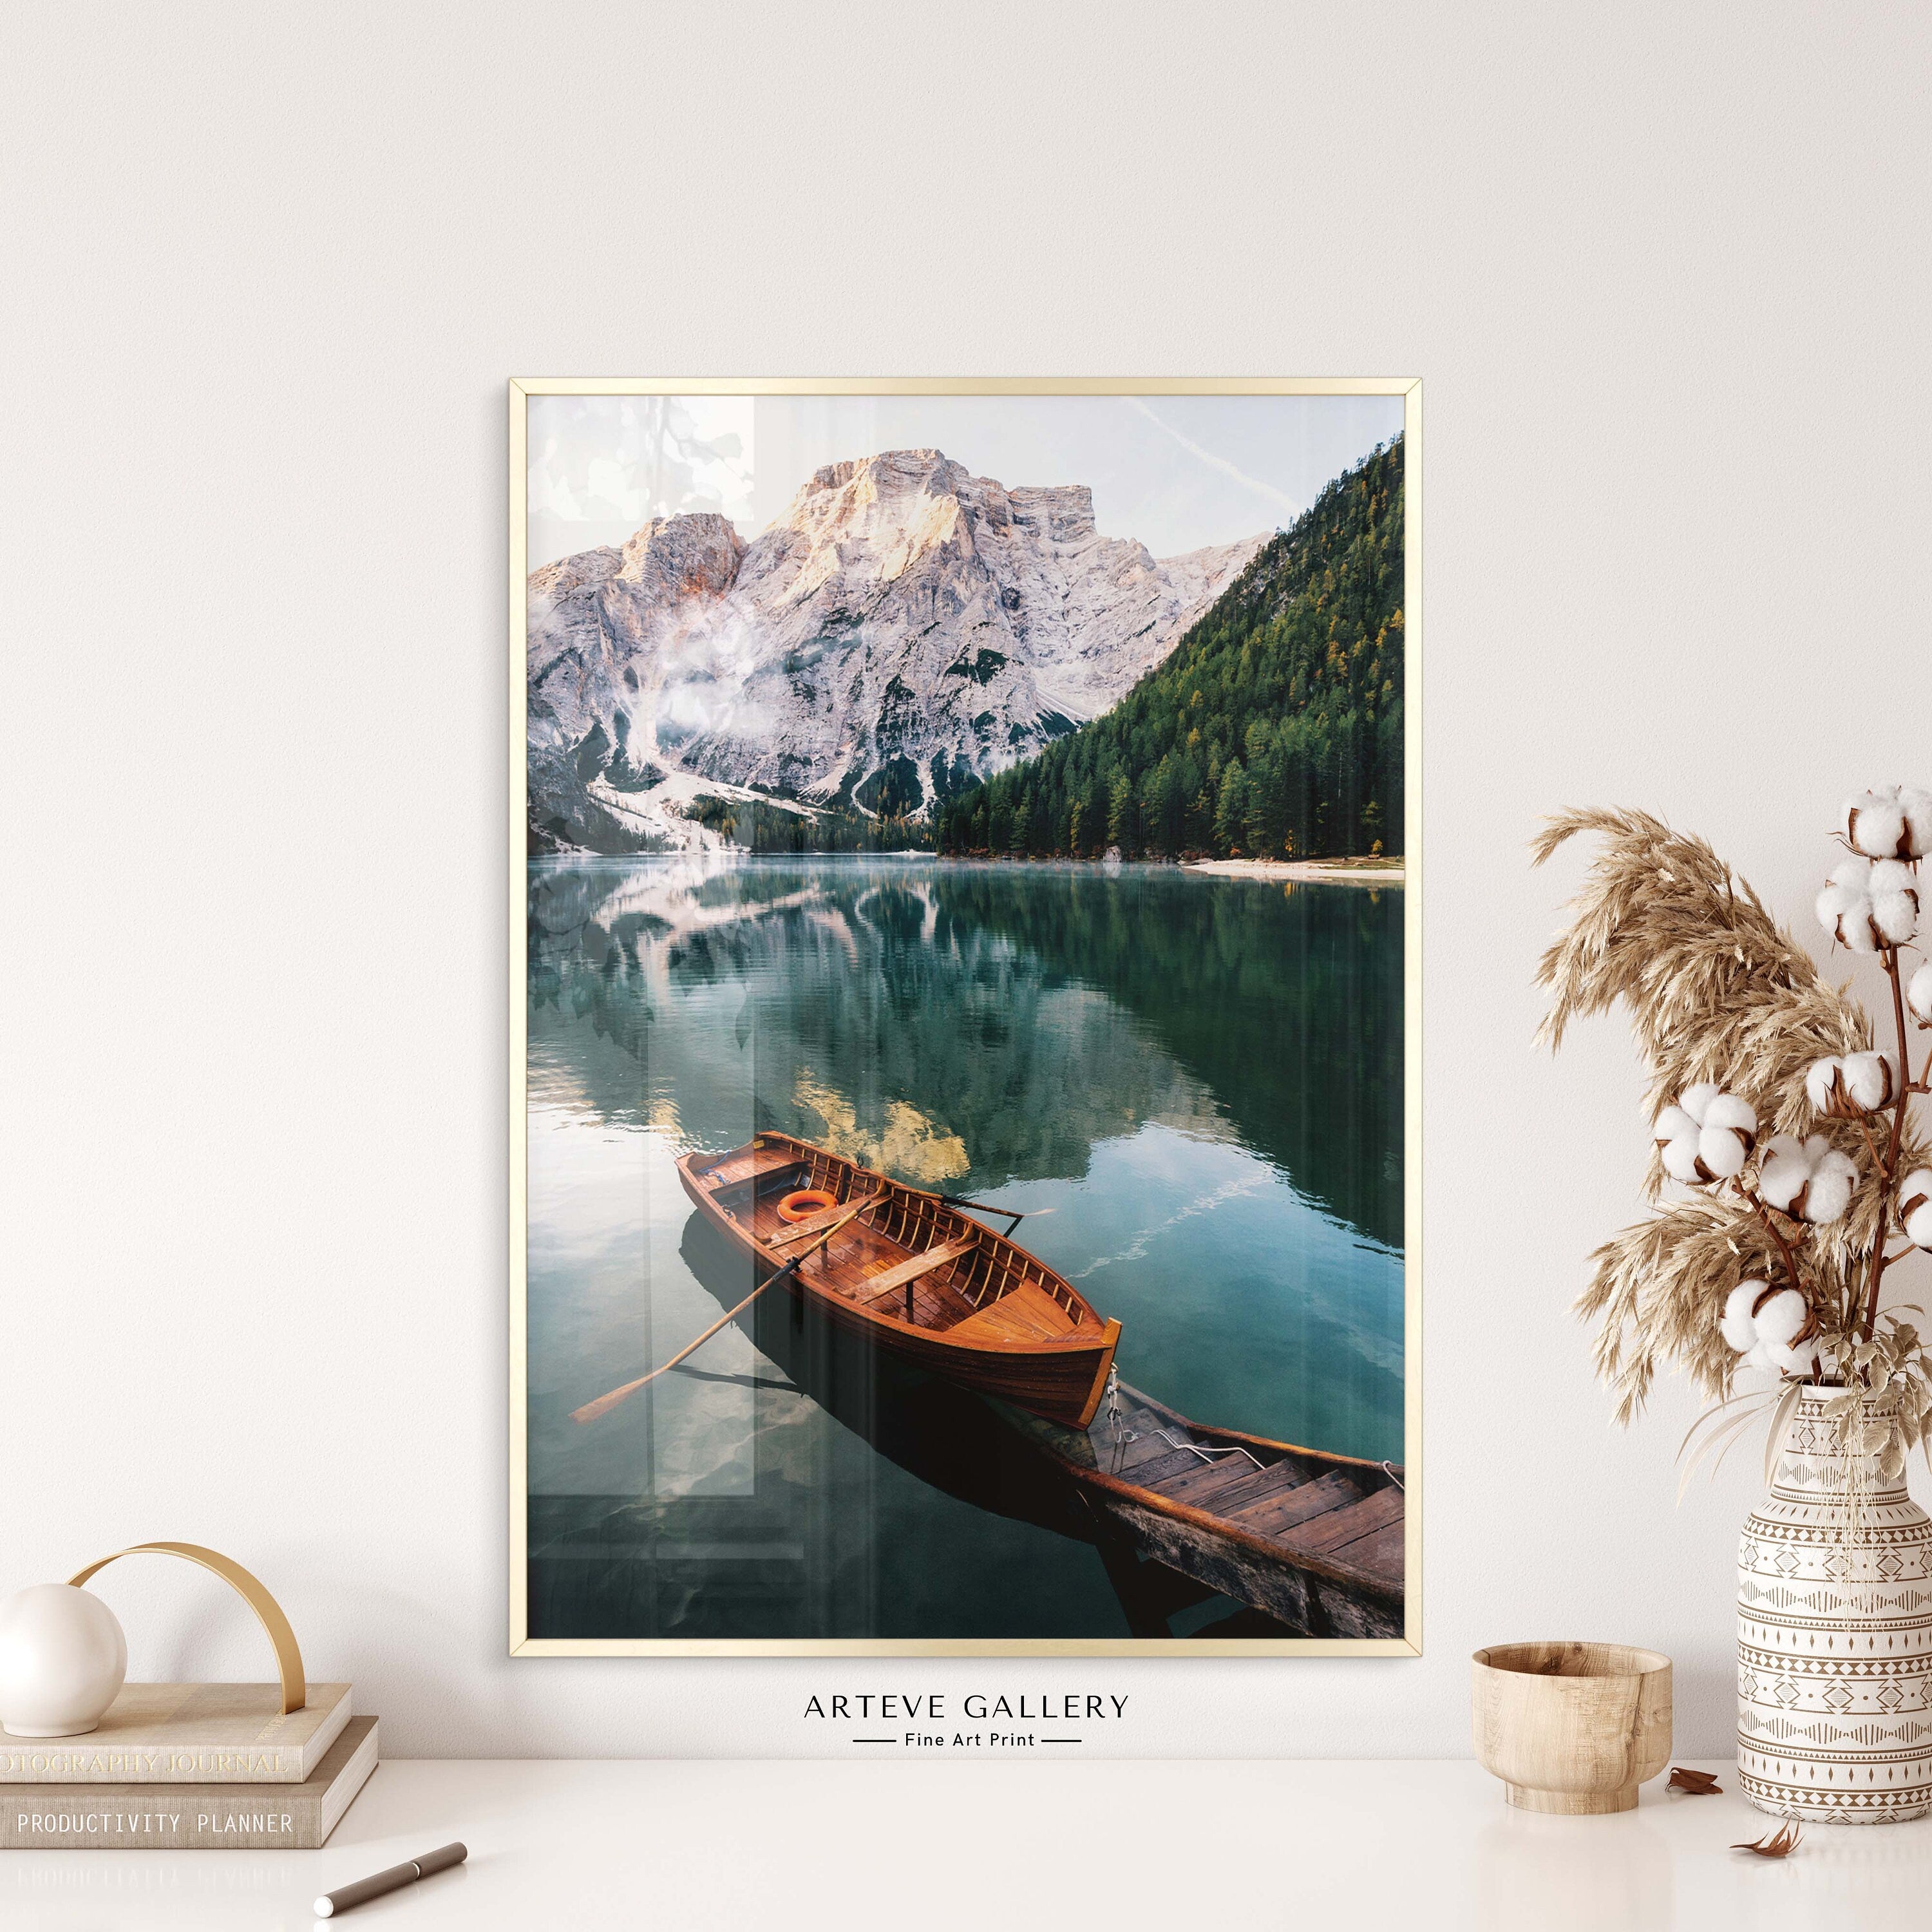 Nature poster with a photographic motif of a red canoe resting on a picturesque wooden pier on a quiet lake. On the side of the clear-blue lake, tall, ice-clad mountains are towering which is reflected beautifully on the still water surface.